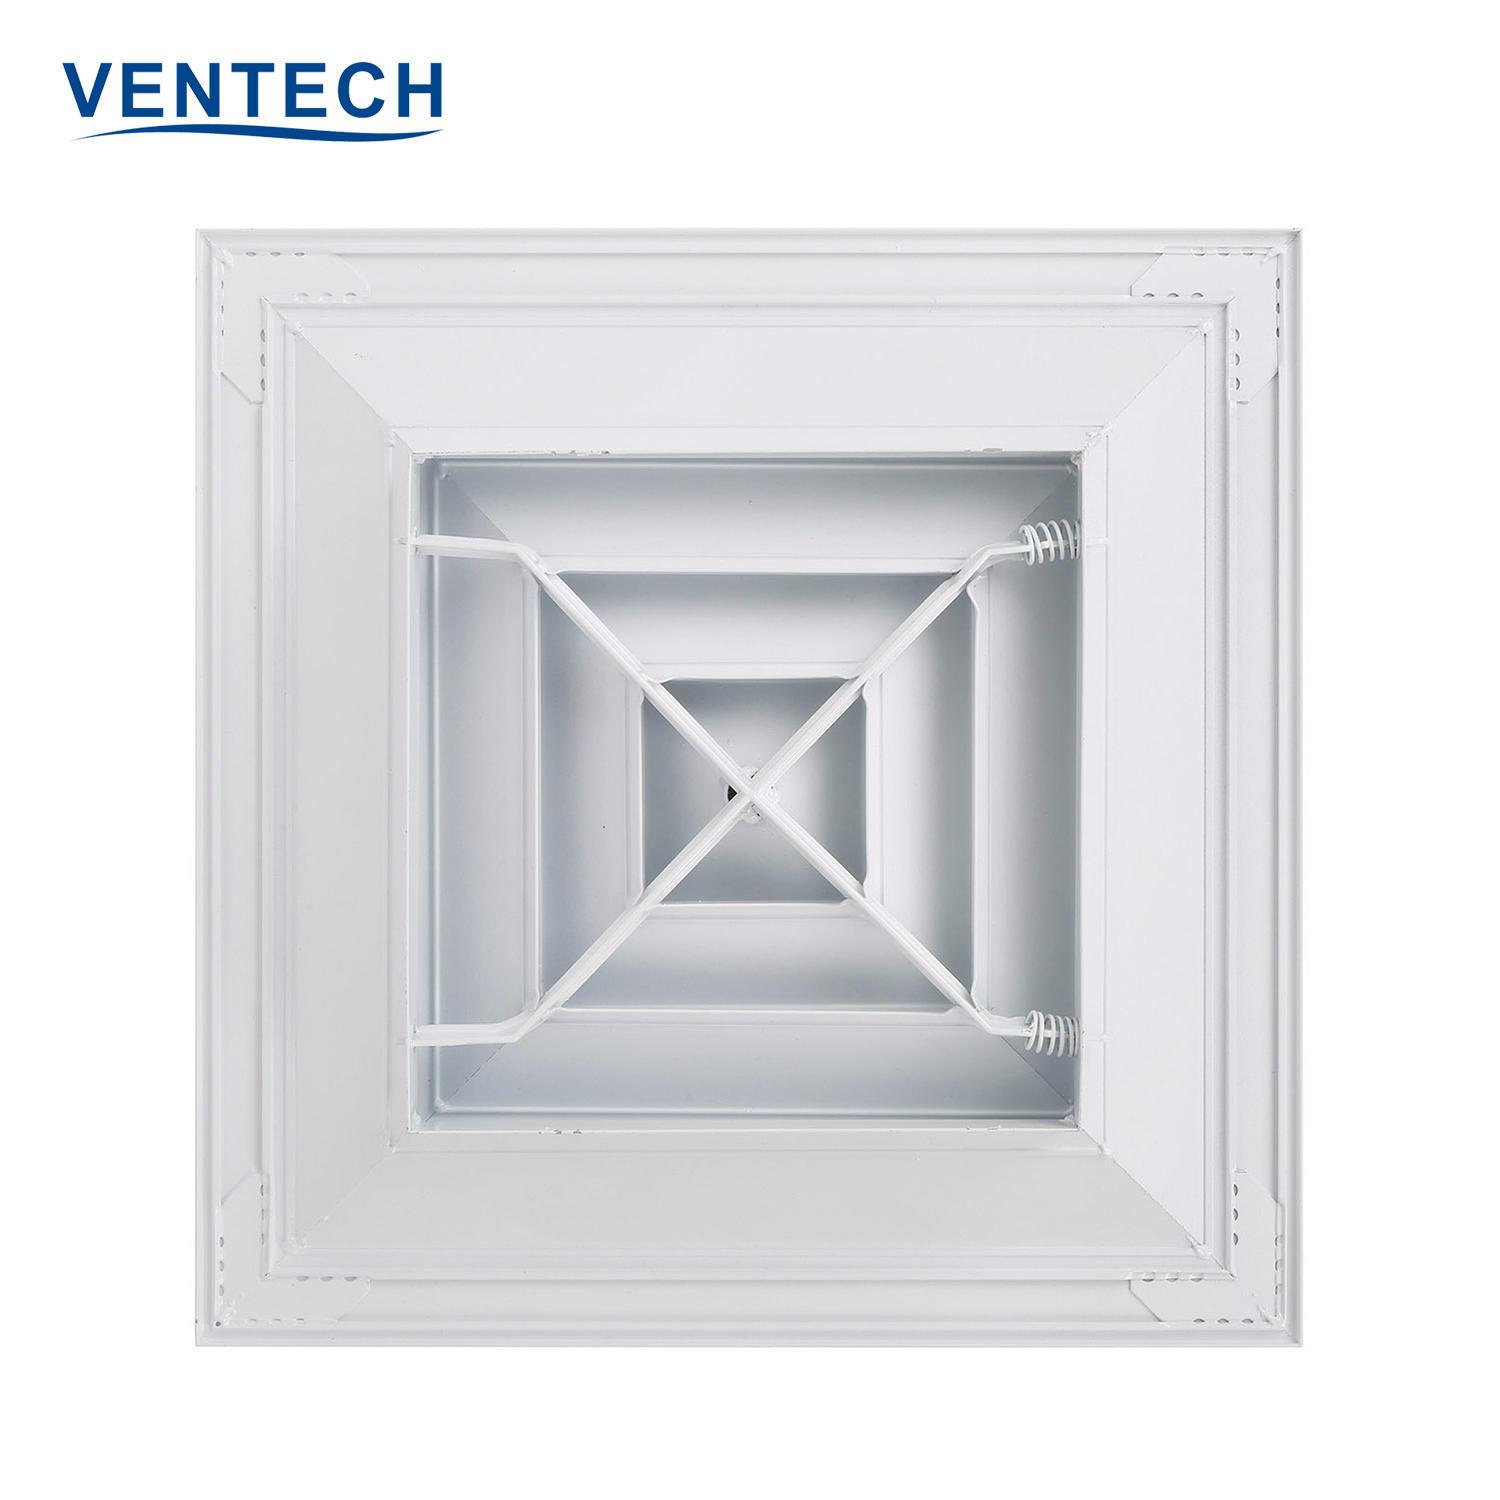 Hvac System Havc Ventilation Aluminum Removable Core Square Supply Ceiling Air Diffusers